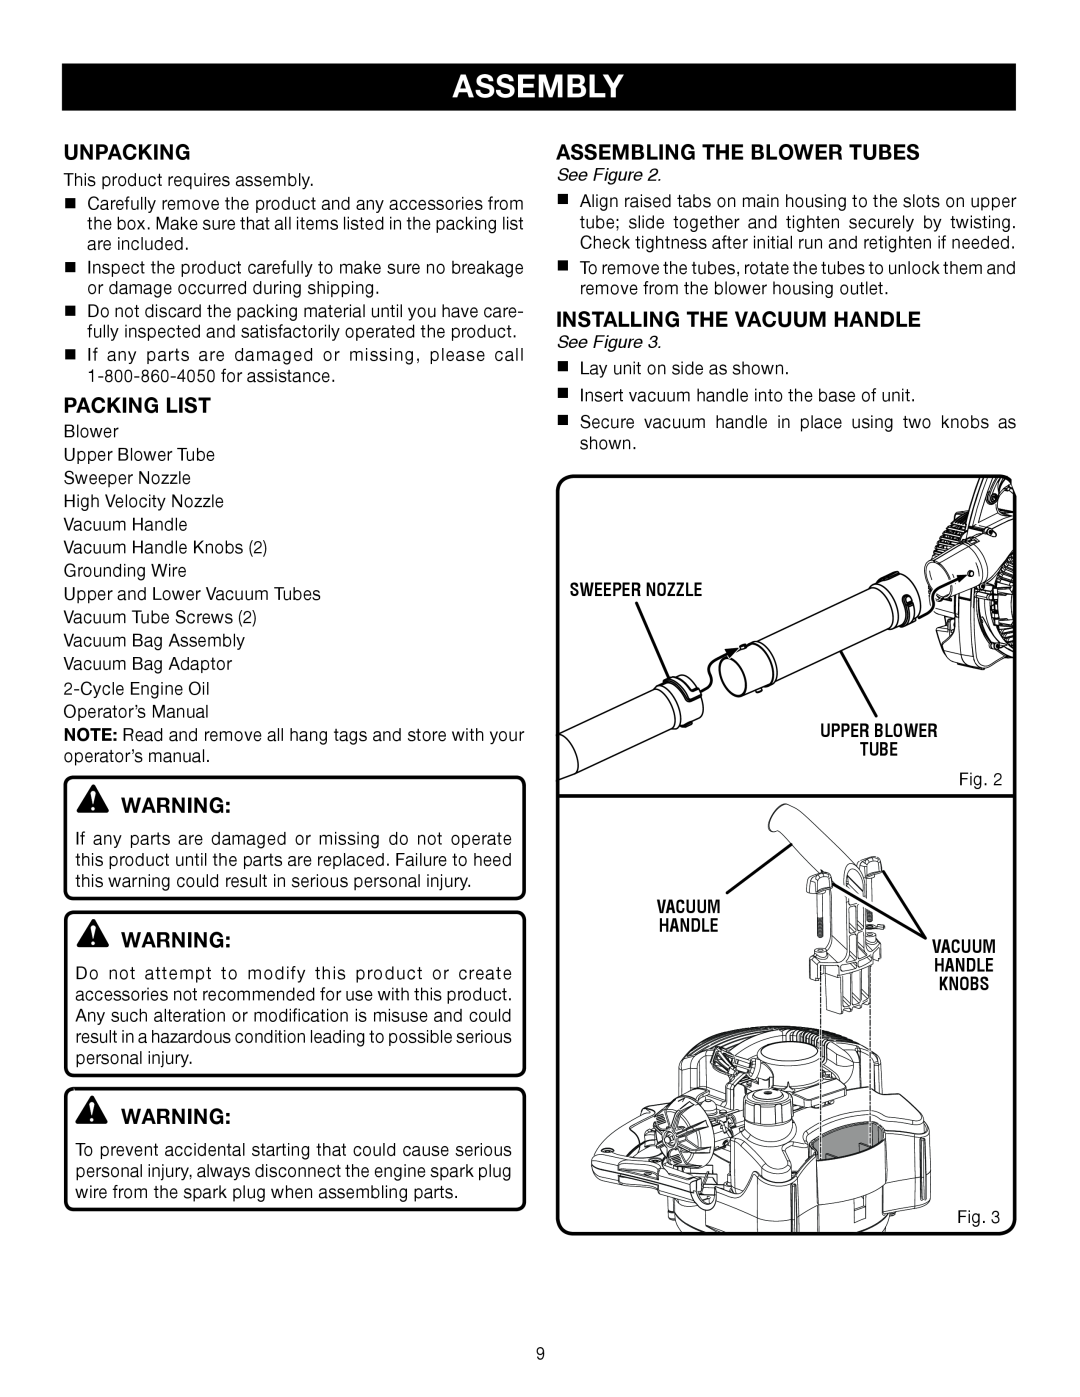 Ryobi RY08552 Assembly, Unpacking, Packing List, Assembling The Blower Tubes, instalLING THE Vacuum handle, See Figure 